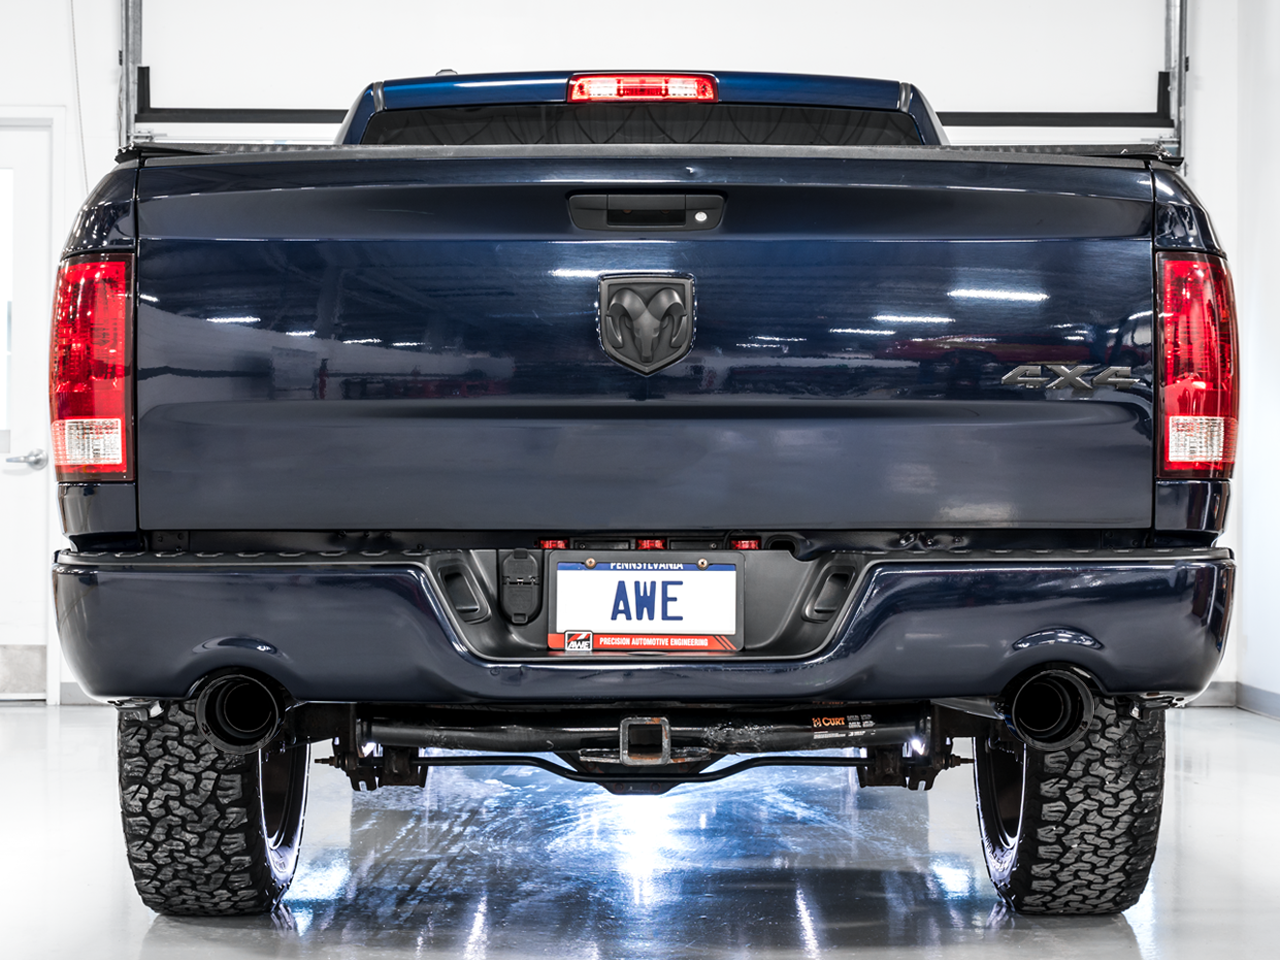 AWE 0FG Dual Rear Exit Catback Exhaust for 4th Gen RAM 1500 5.7L (With Bumper Cutouts) - Diamond Black Tips